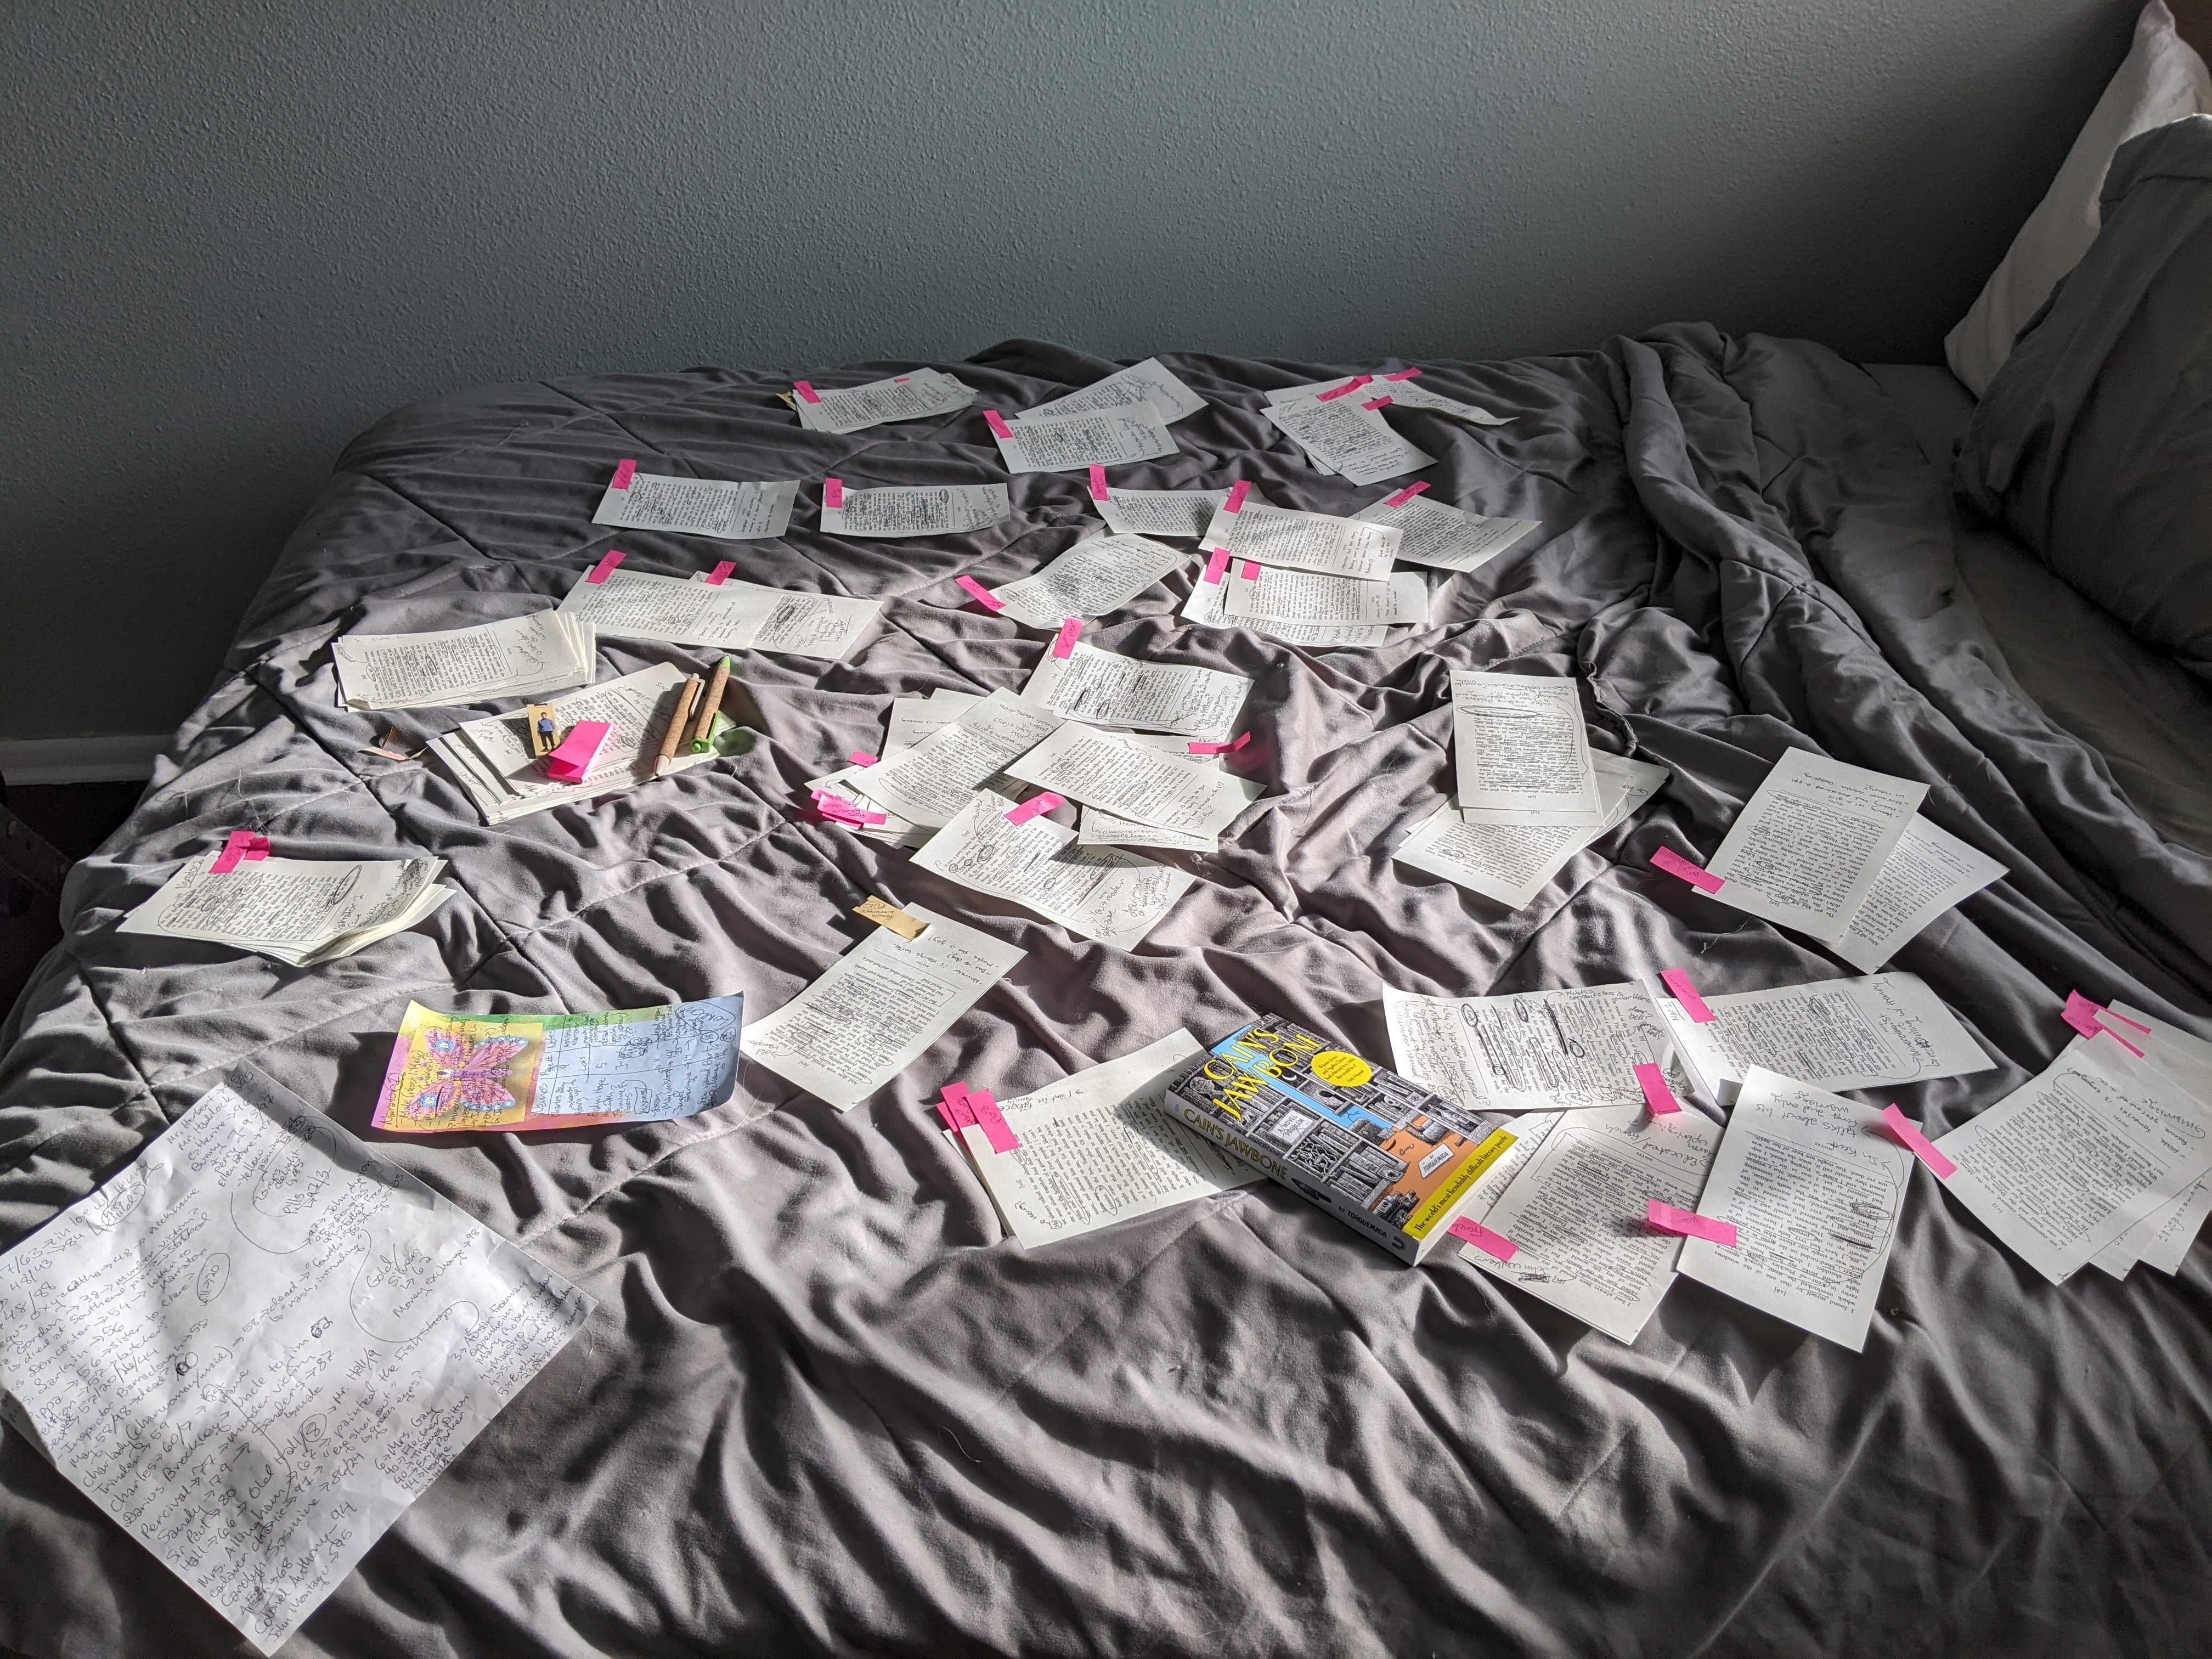 Papers, books and notes laid out on a bed.